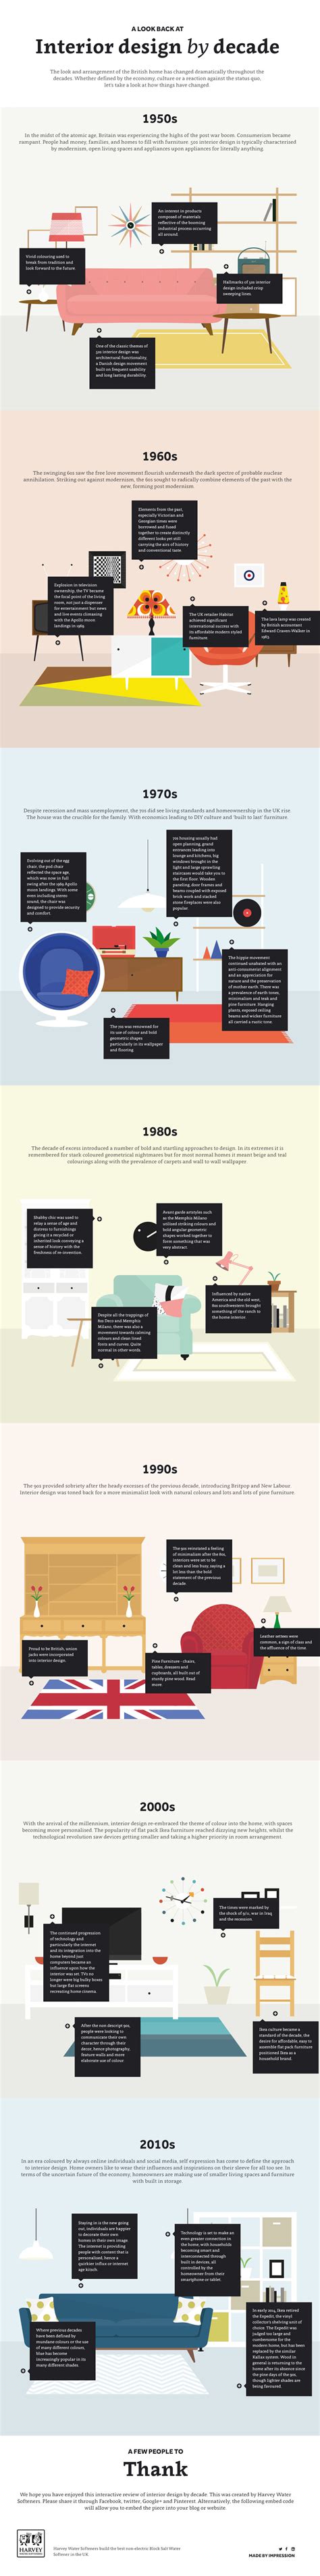 A Look Back At Interior Design By Decade Infographic